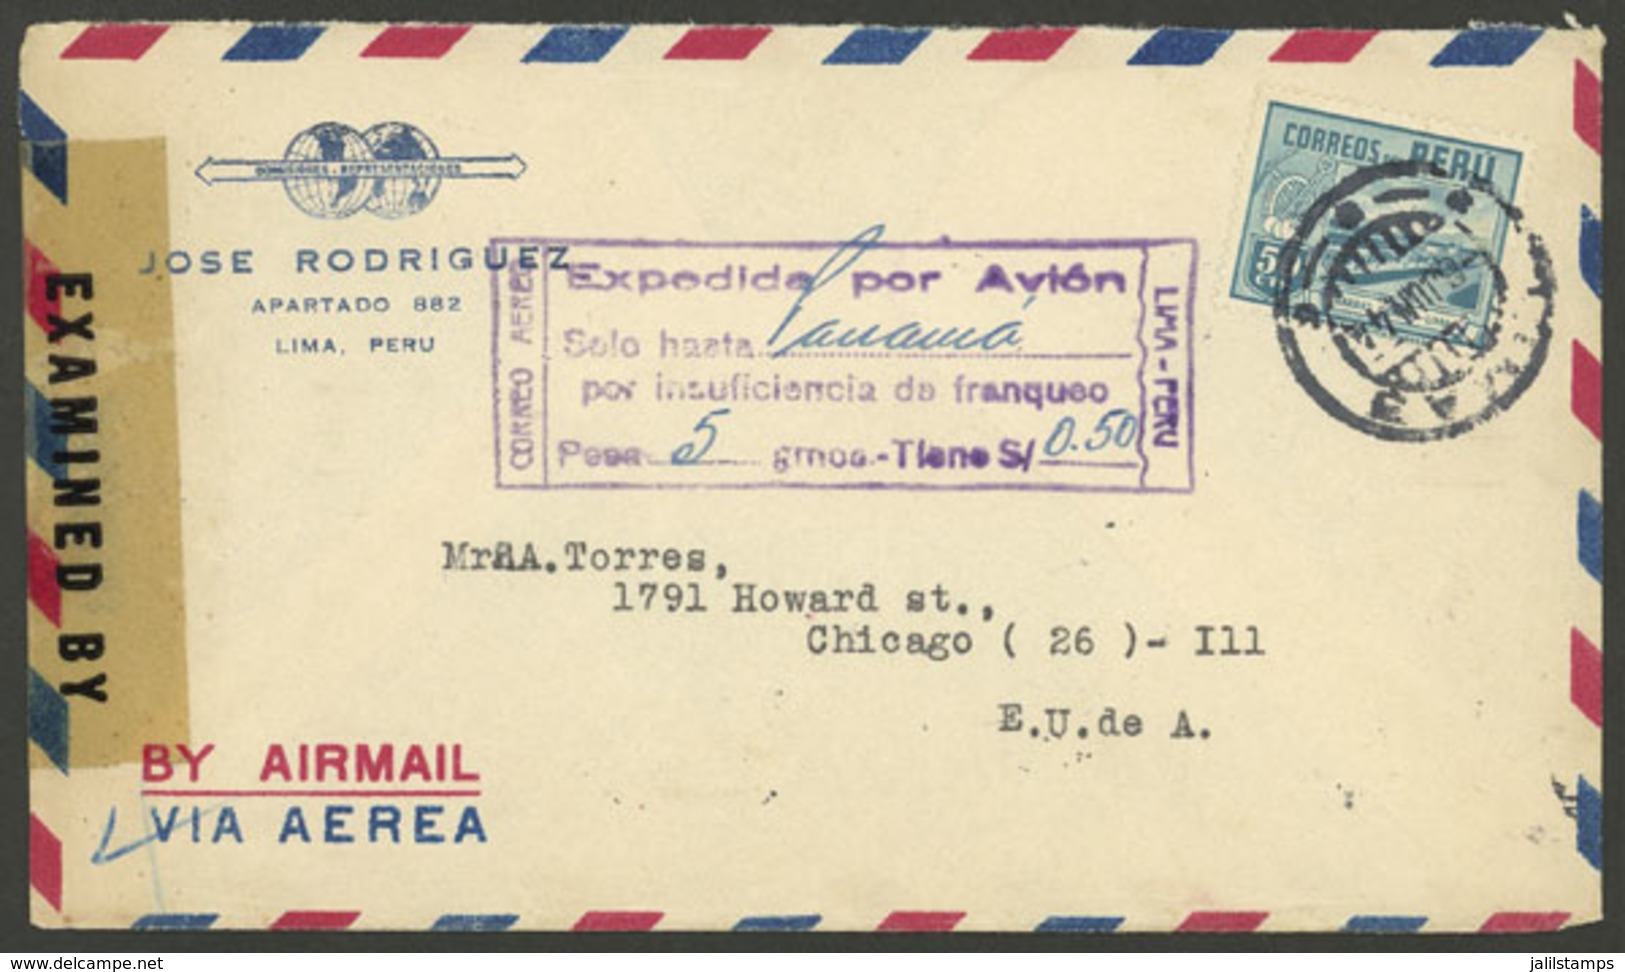 PERU: 6/JUN/1944 Lima - USA, Airmail Cover Franked With 50c., With Violet Rectangular Mark Indicating That The Letter Wo - Peru